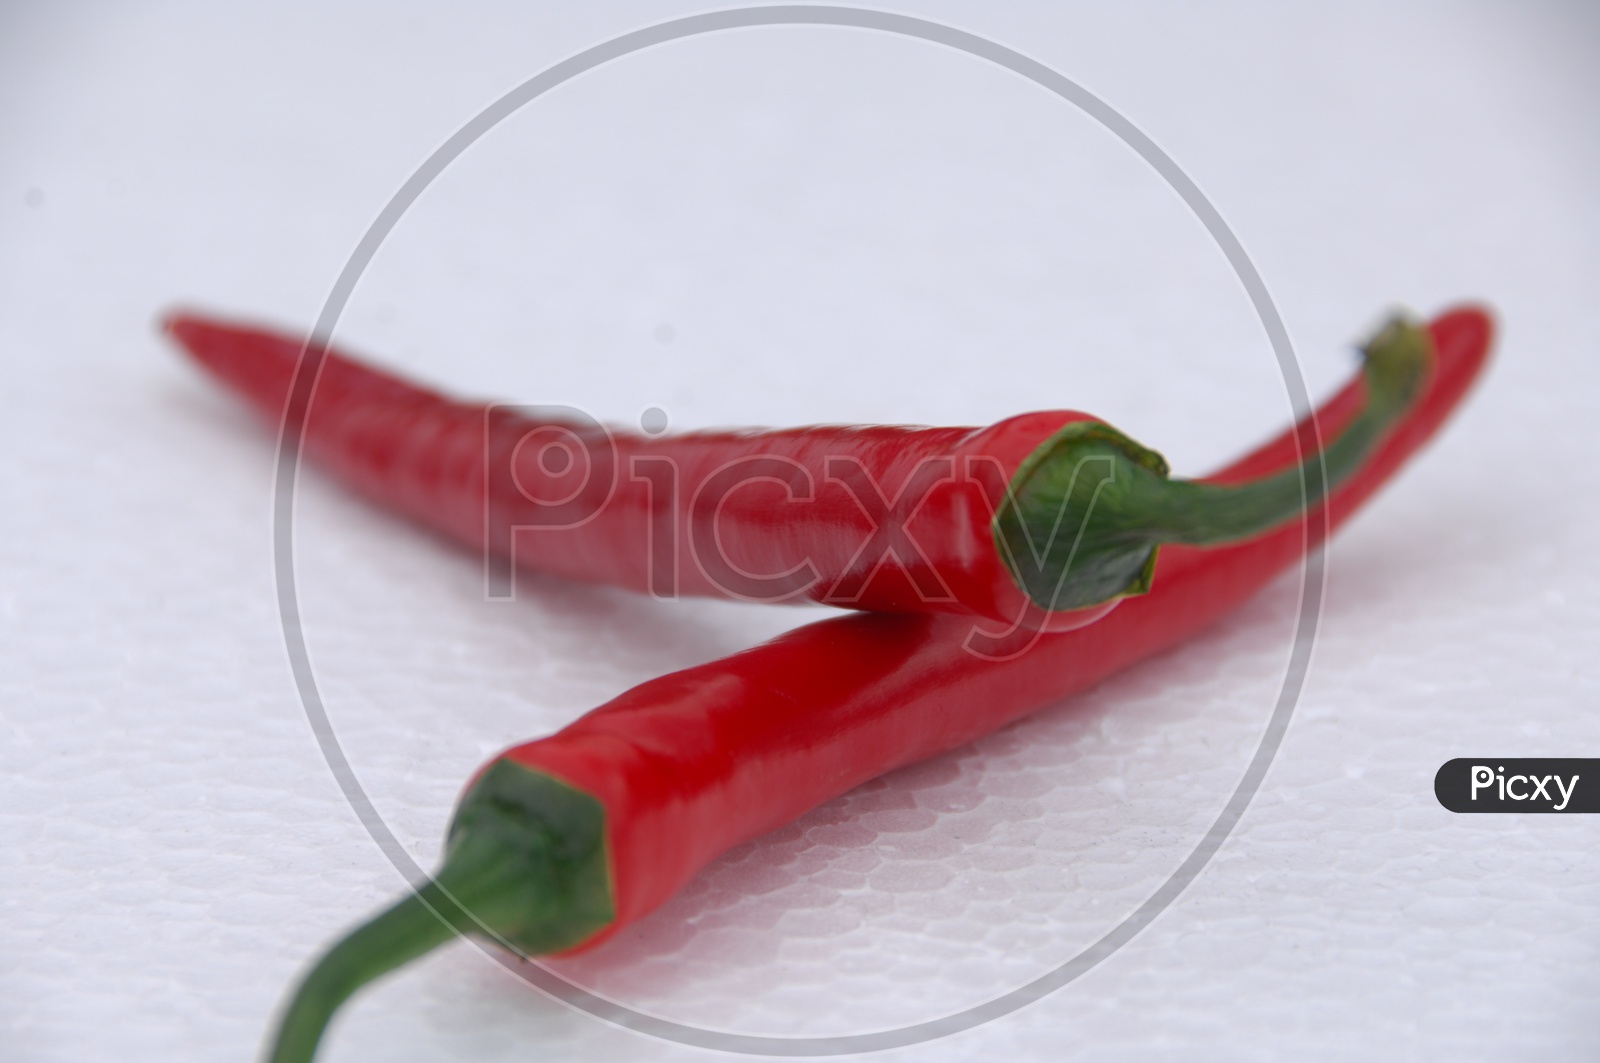 Red Chillies On an Isolated White Background